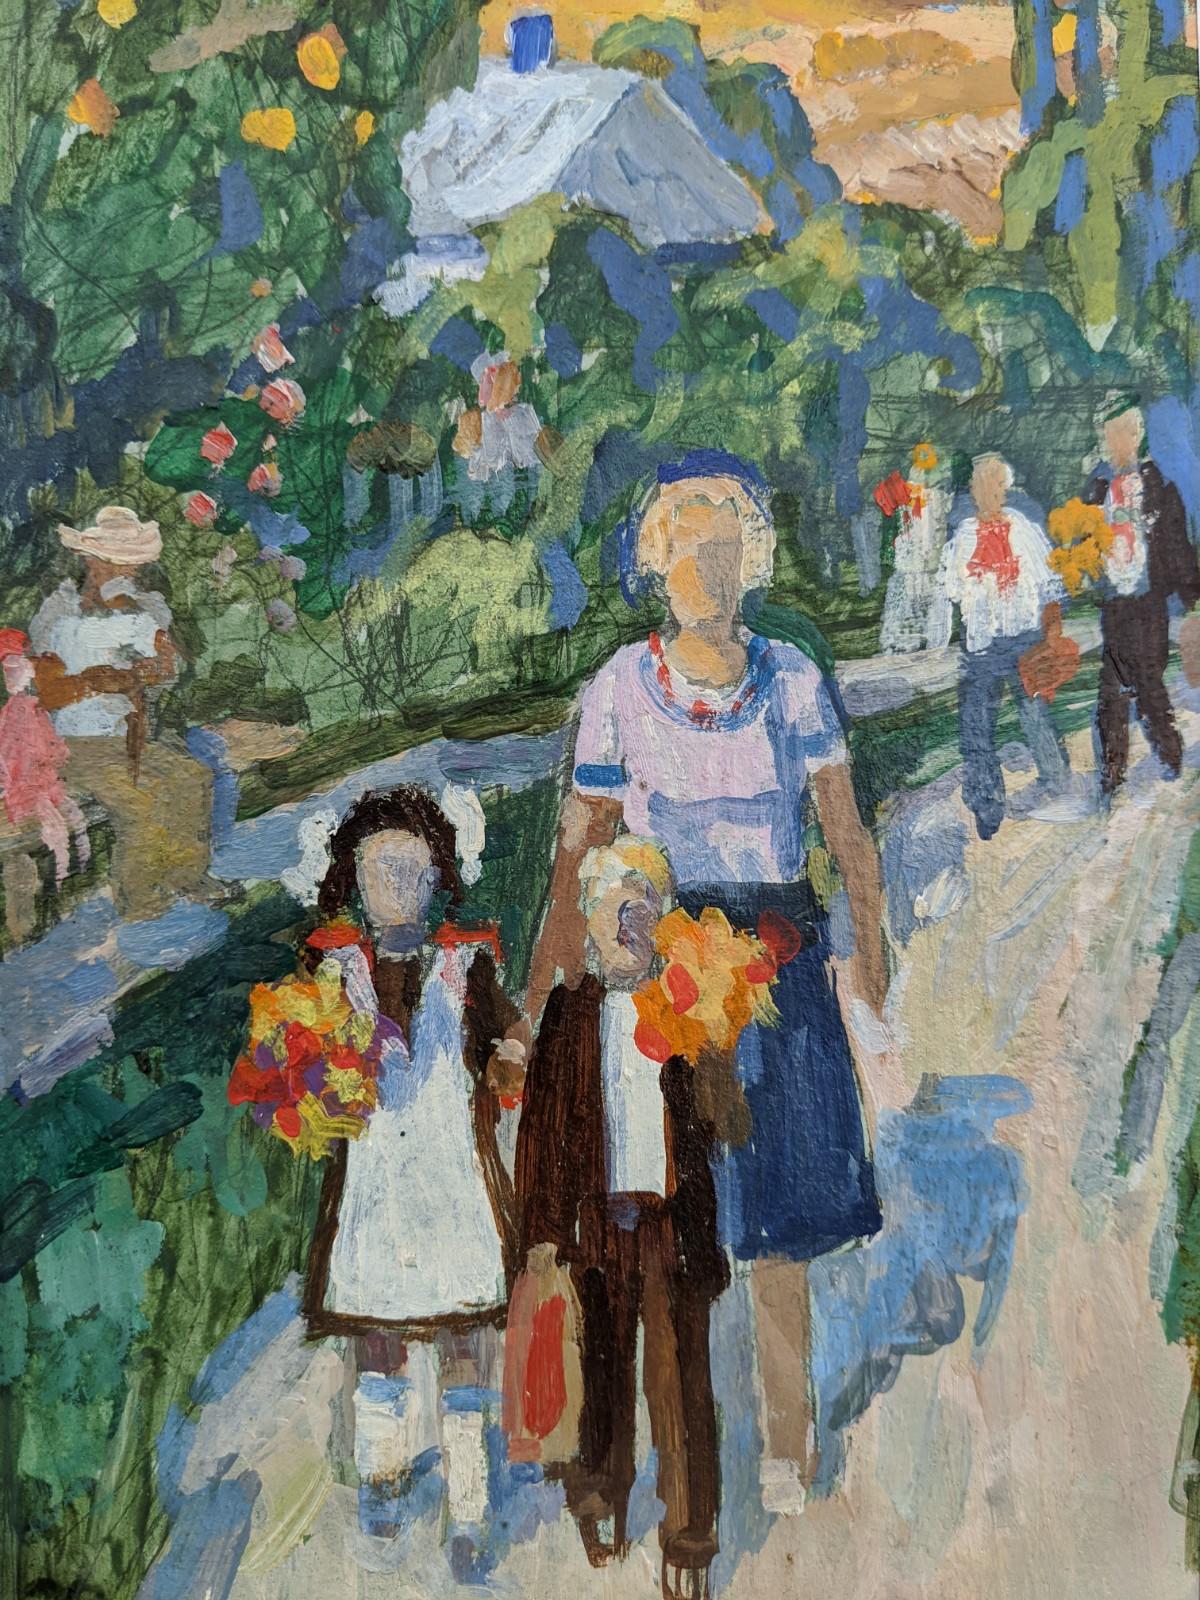 OFF TO SCHOOL
Oil on canvas
Size: 32 x 25.5 cm (including frame)

A lovely and endearing miniature oil on canvas depicting a scene of a pedestrian walkway on a fine summer’s day.

A woman in the foreground can be seen walking with her 2 children to